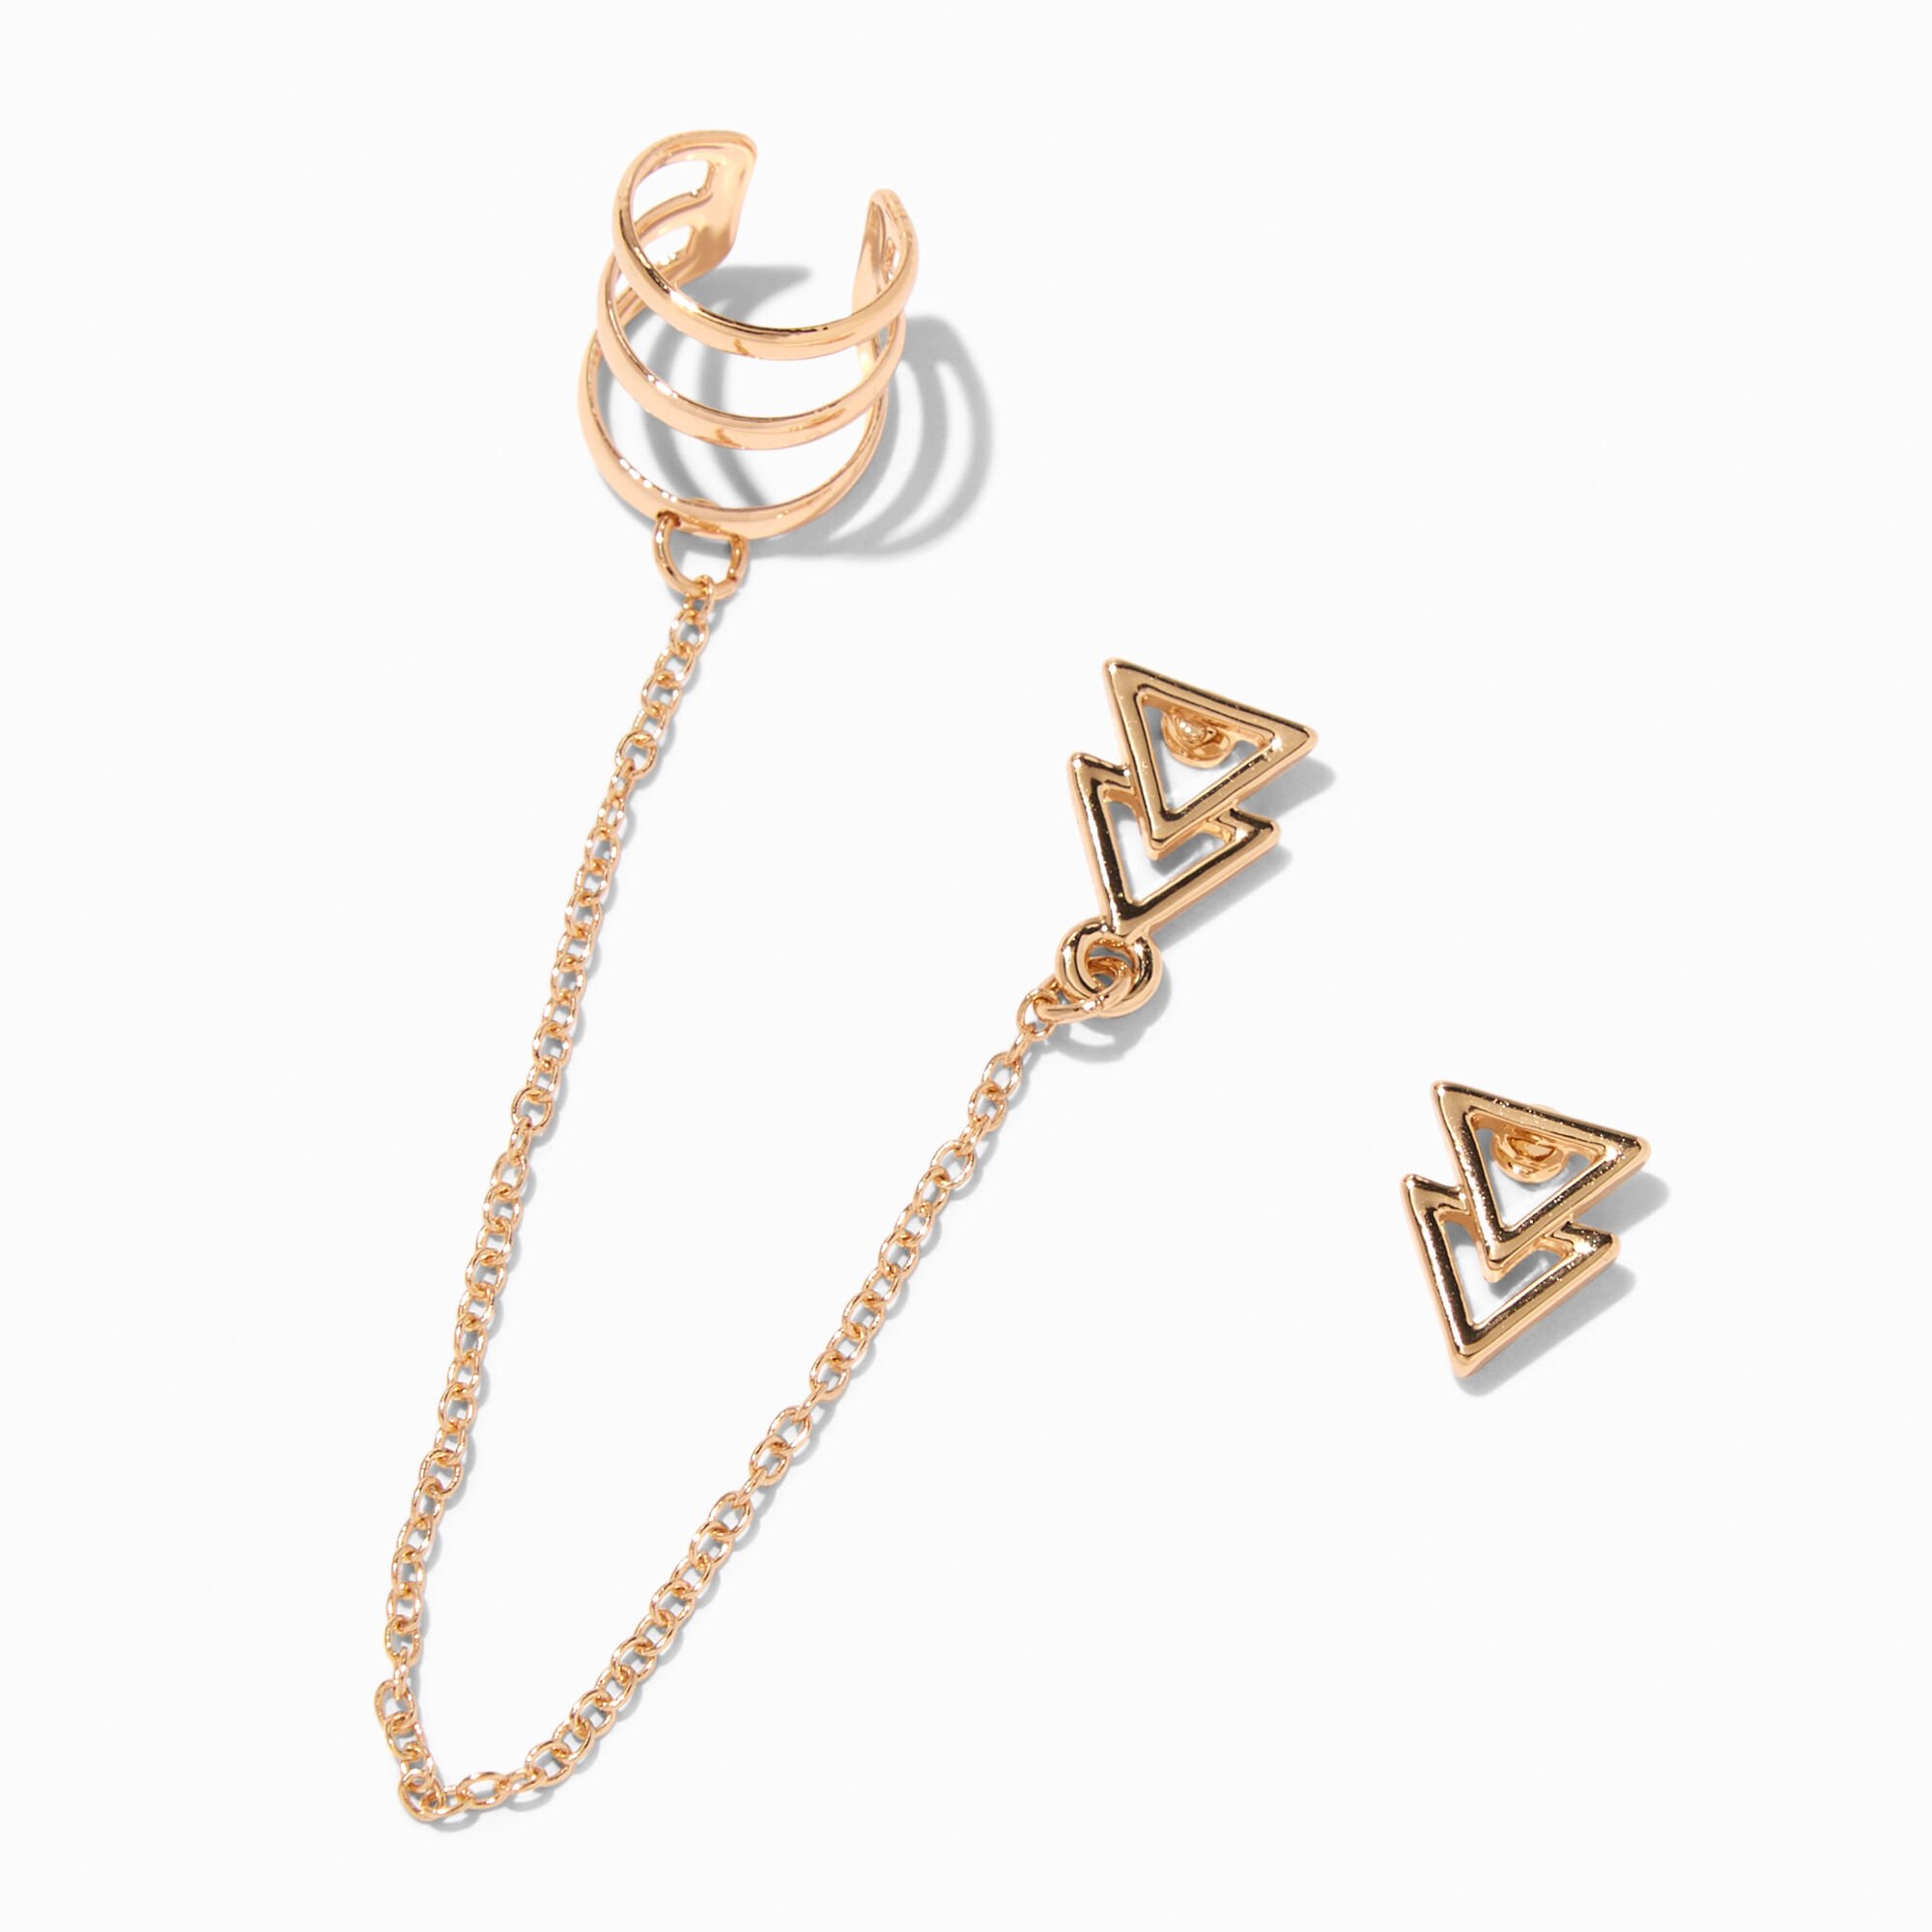 View Claires Tone Double Triangle Connector Earrings Gold information